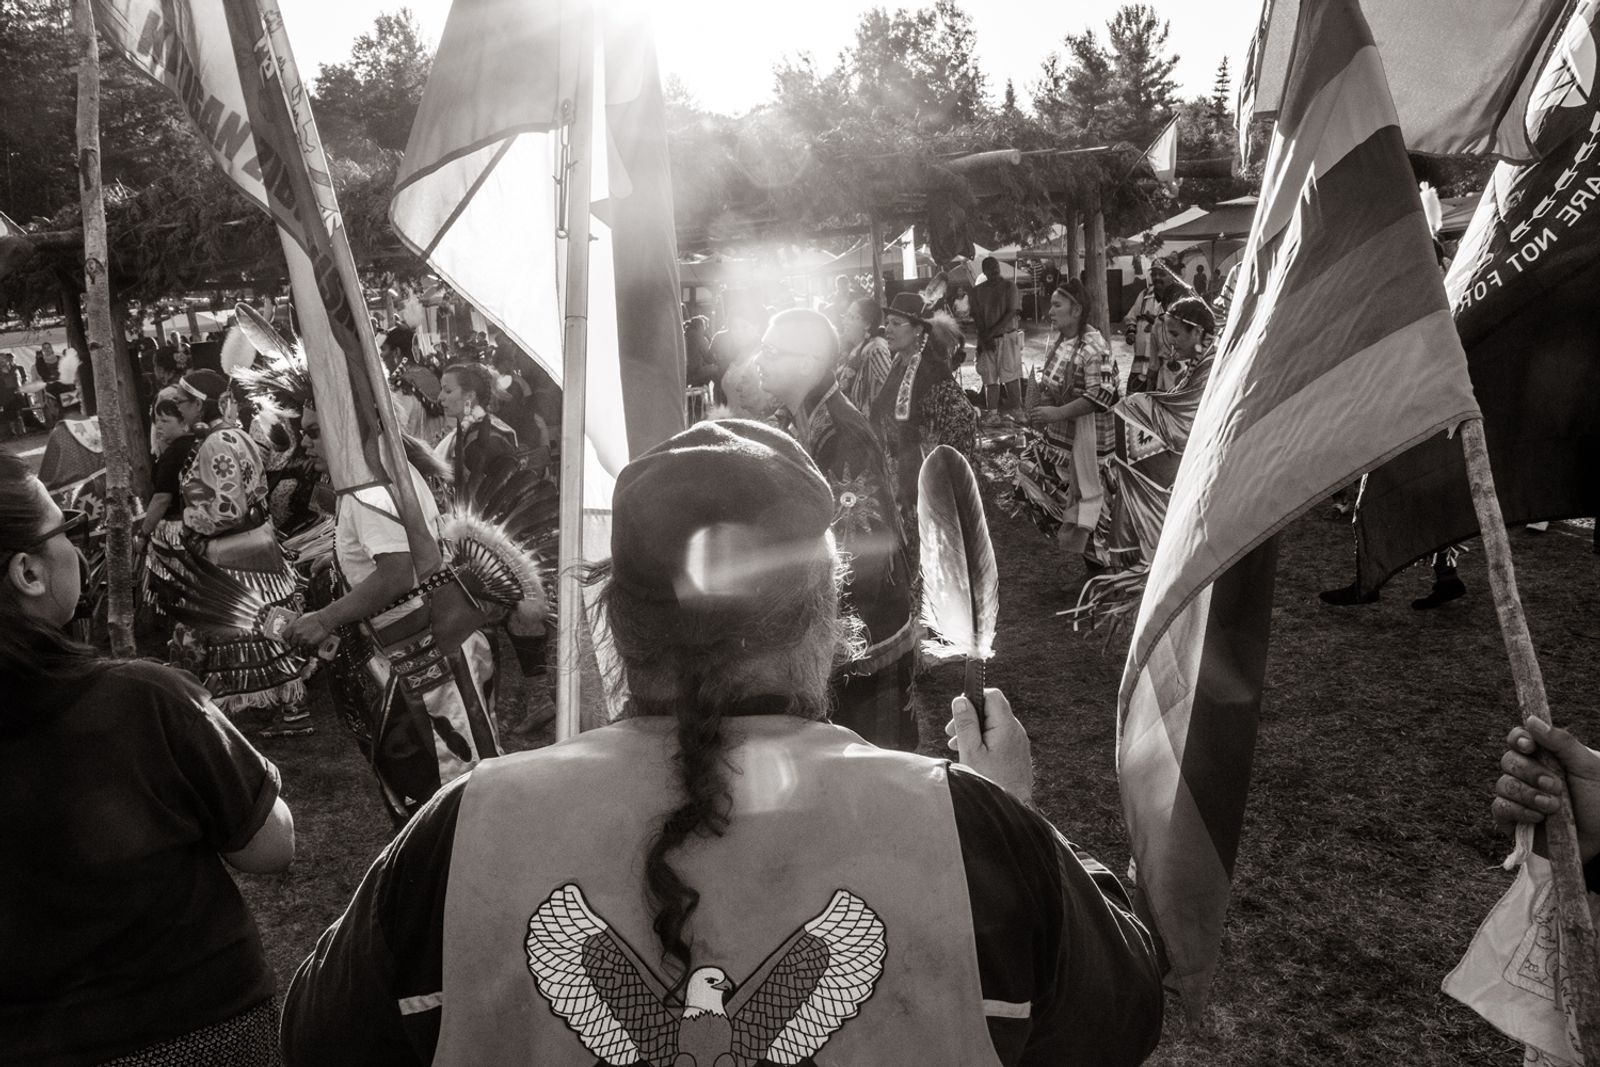 © David Trattles - Image from the Kitigan Zibi Traditional Powwow photography project